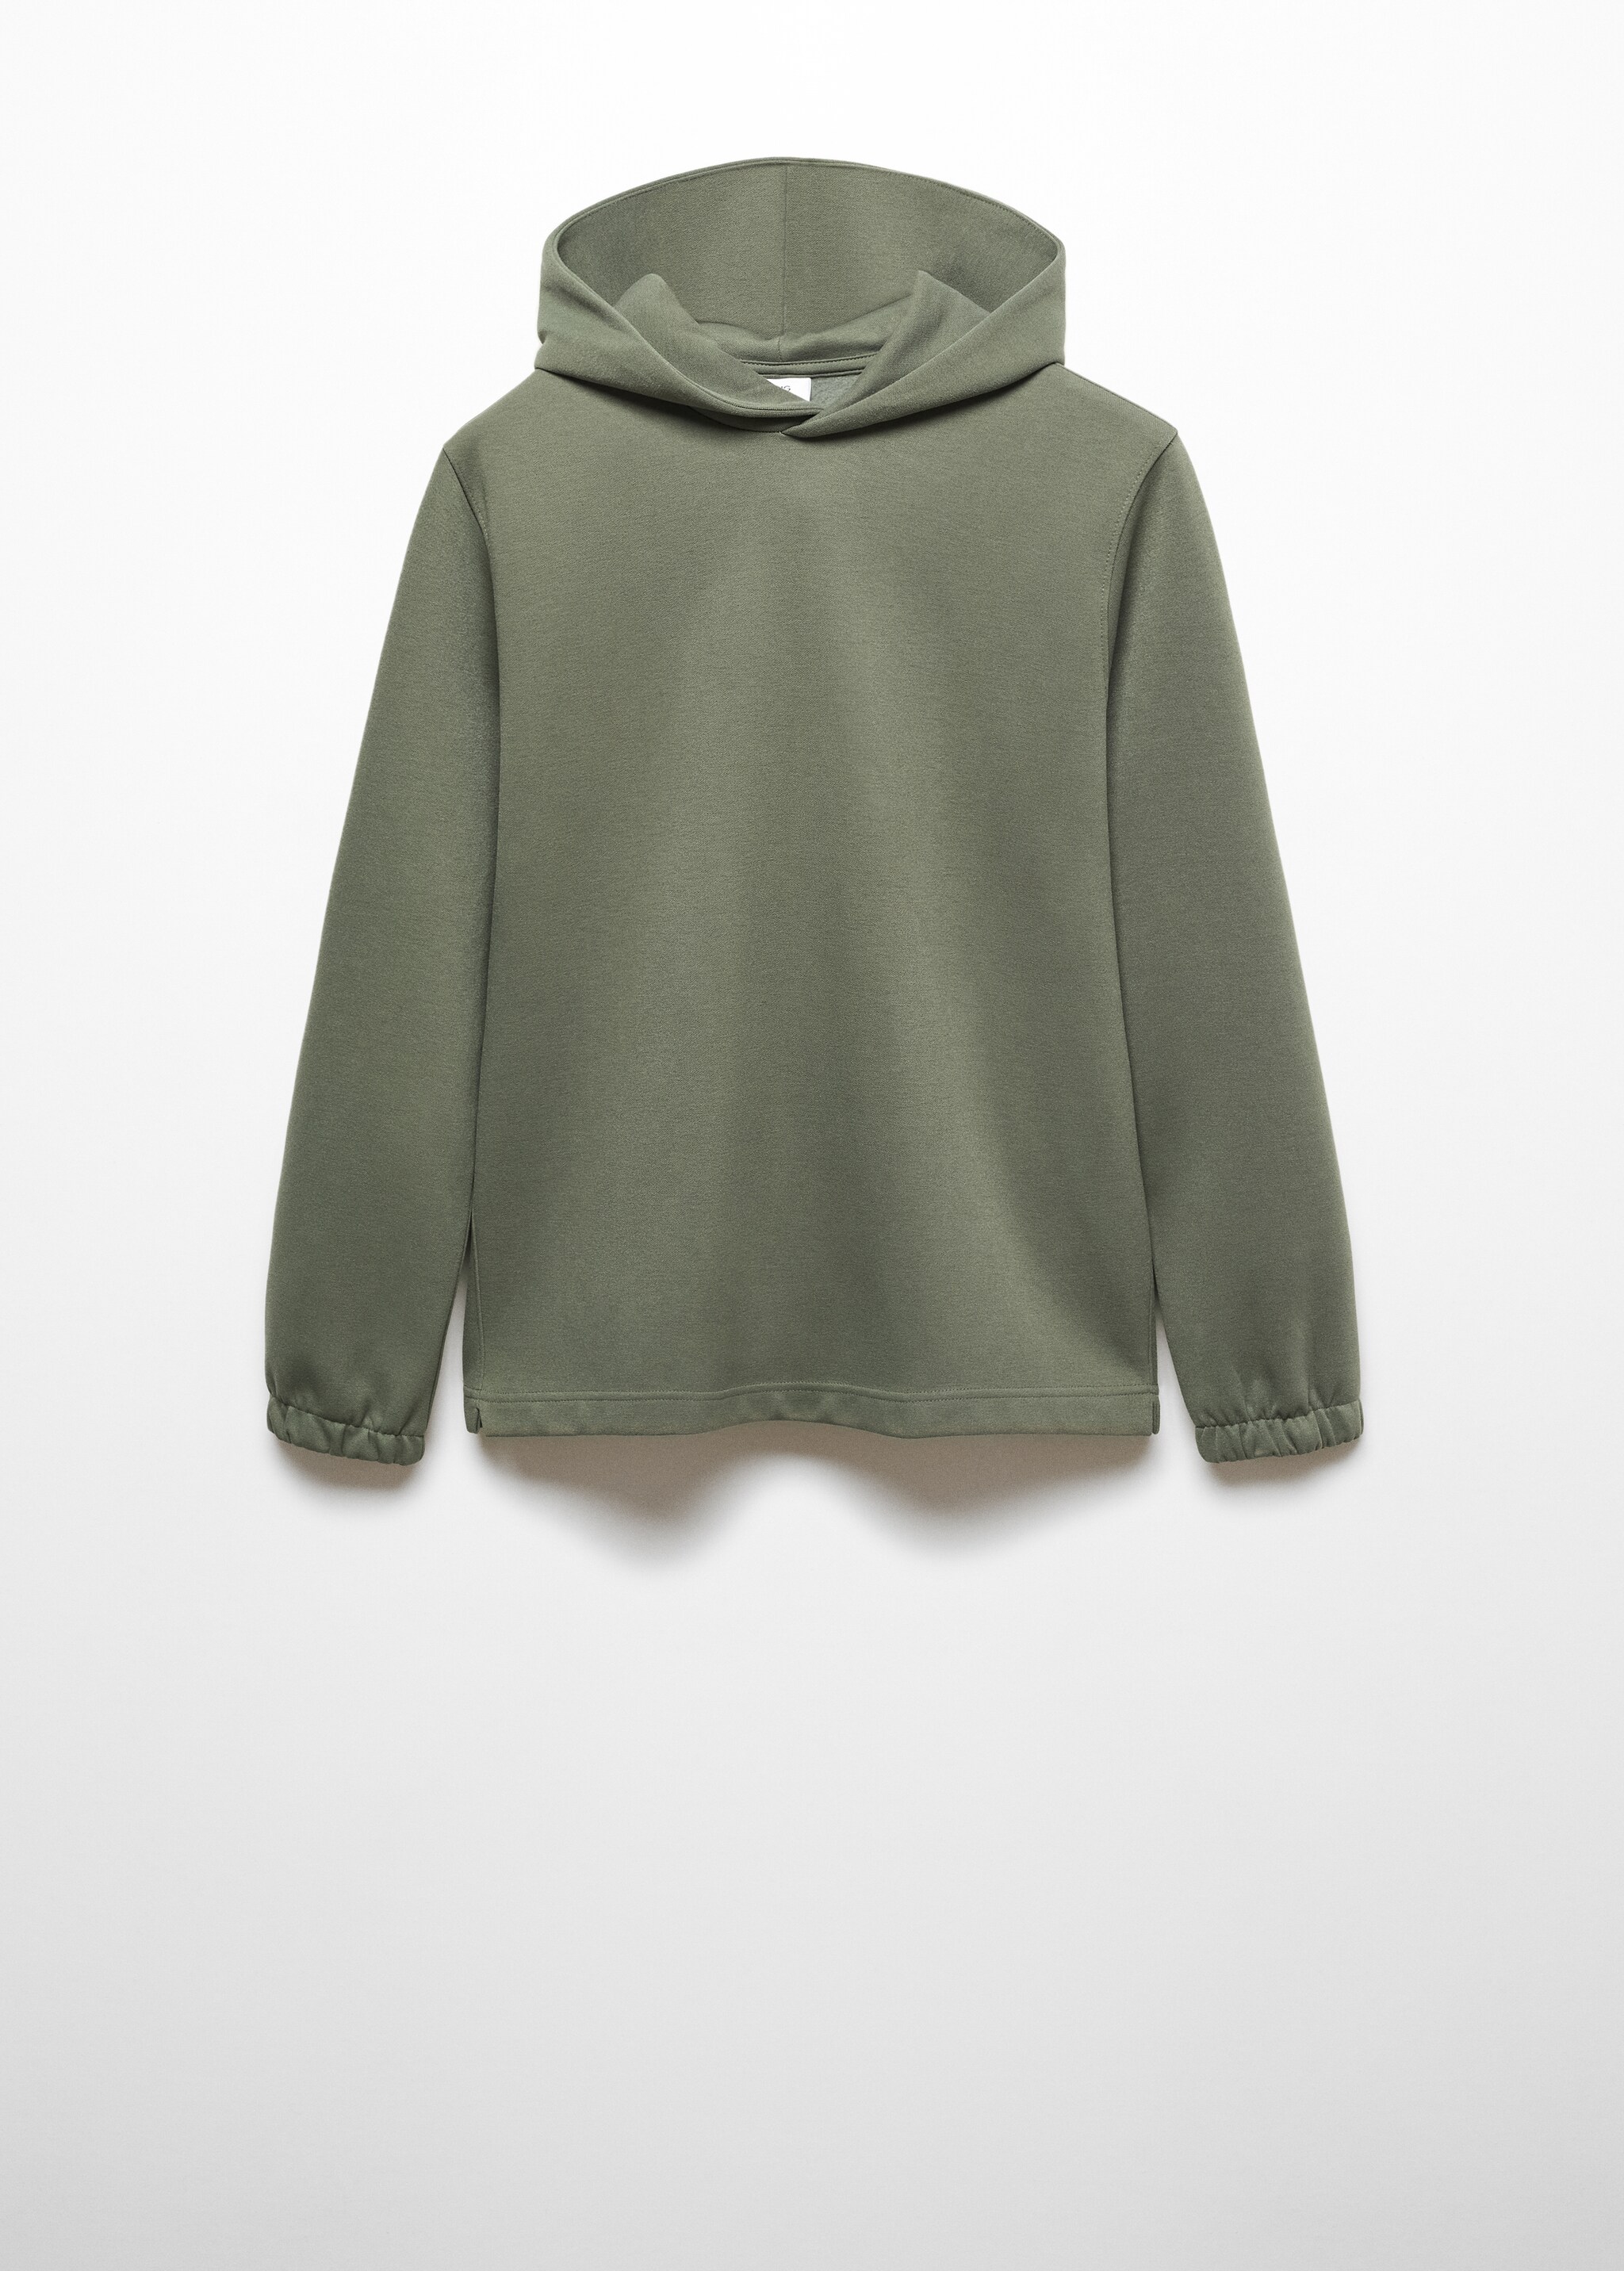 Hoodie cotton sweatshirt - Article without model